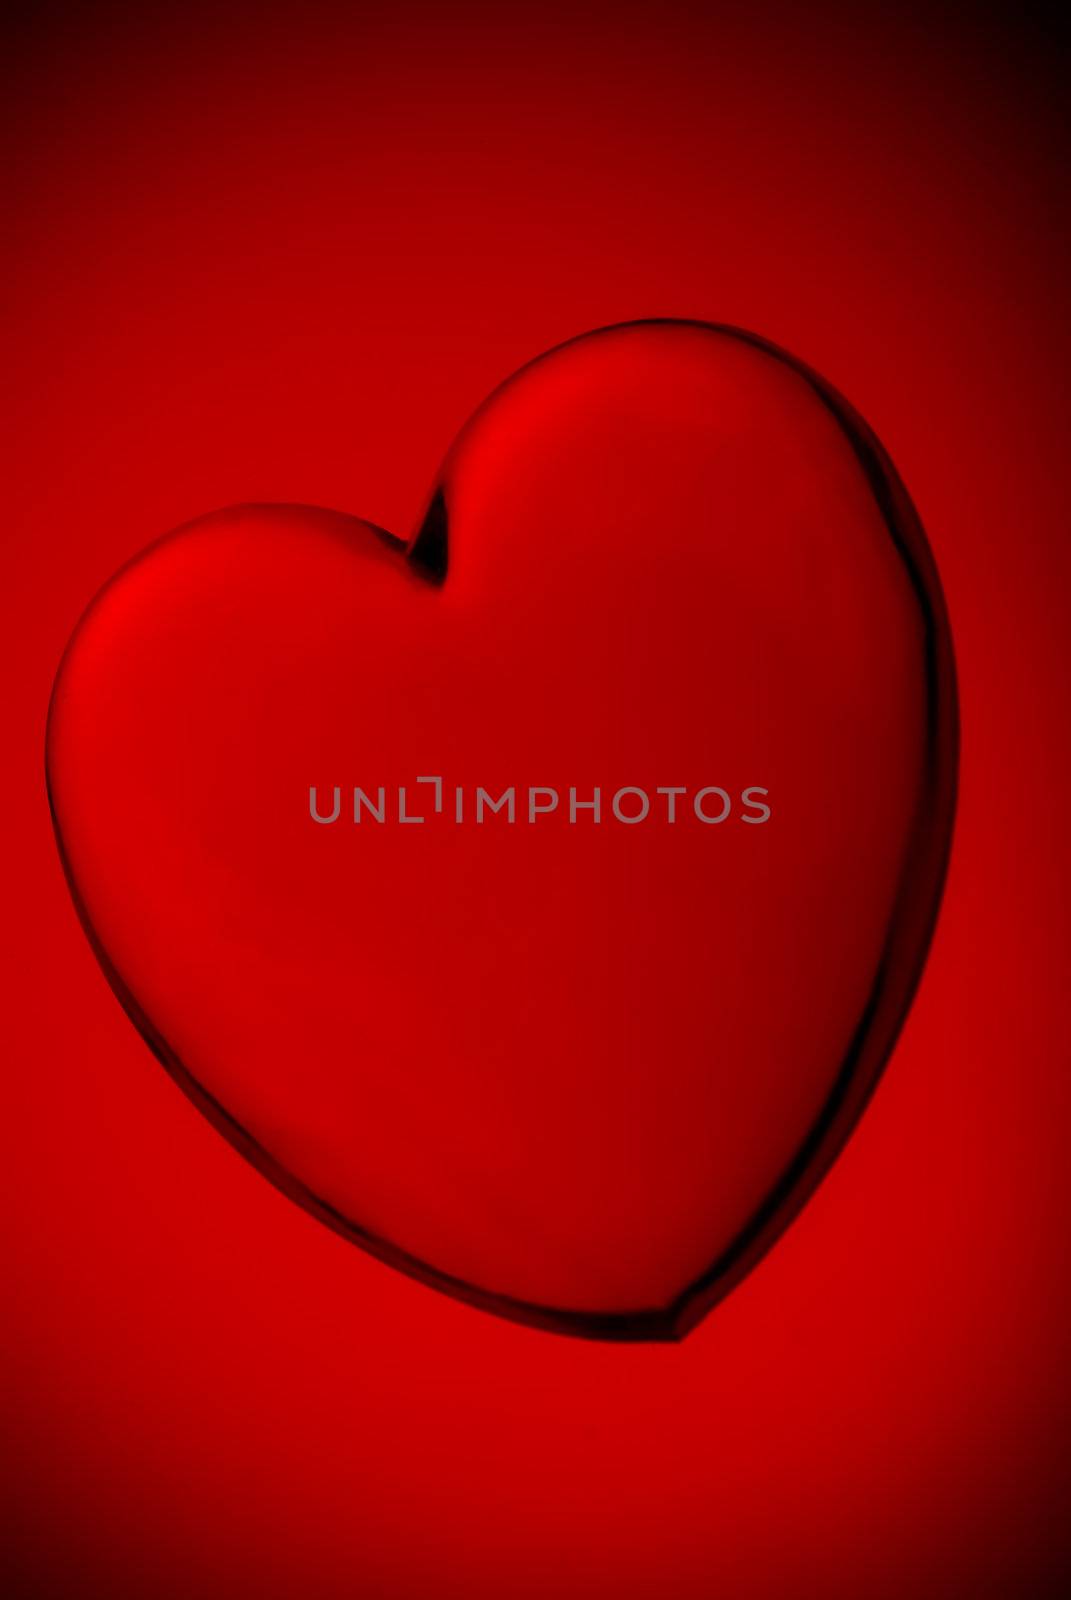 red heartshape, great for Valentine's day background designs.